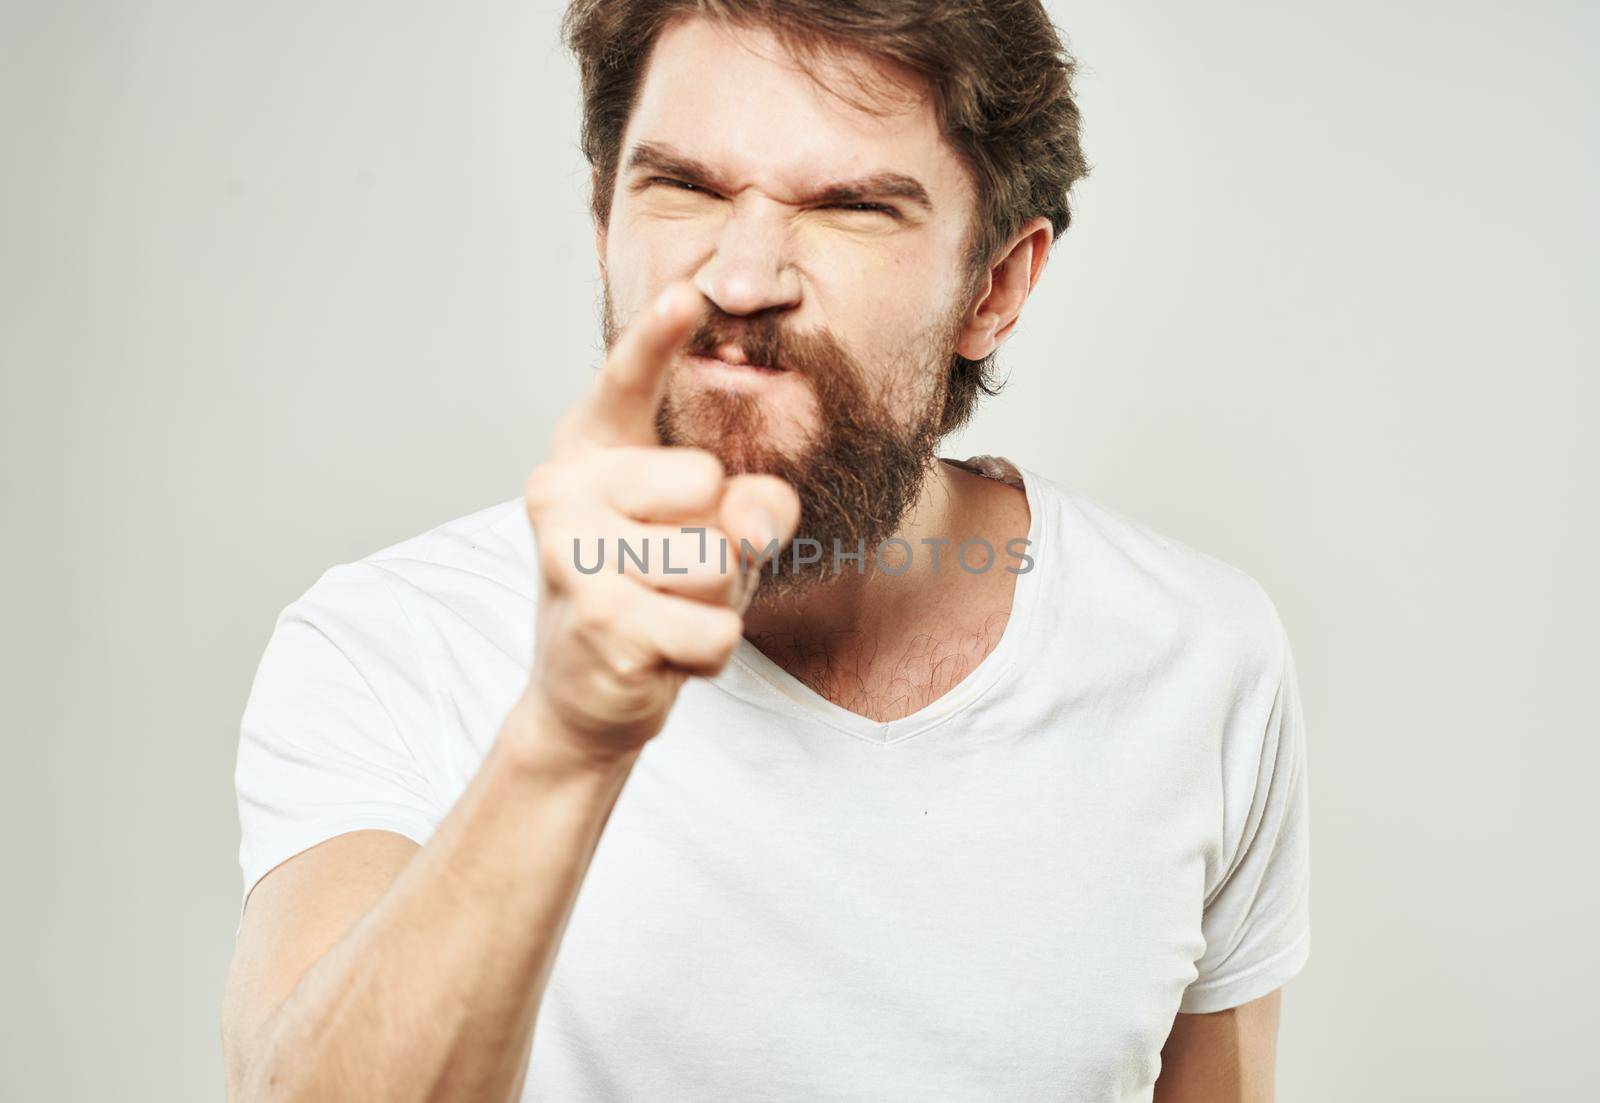 emotional man gesturing with his hands on a light background aggression scream. High quality photo